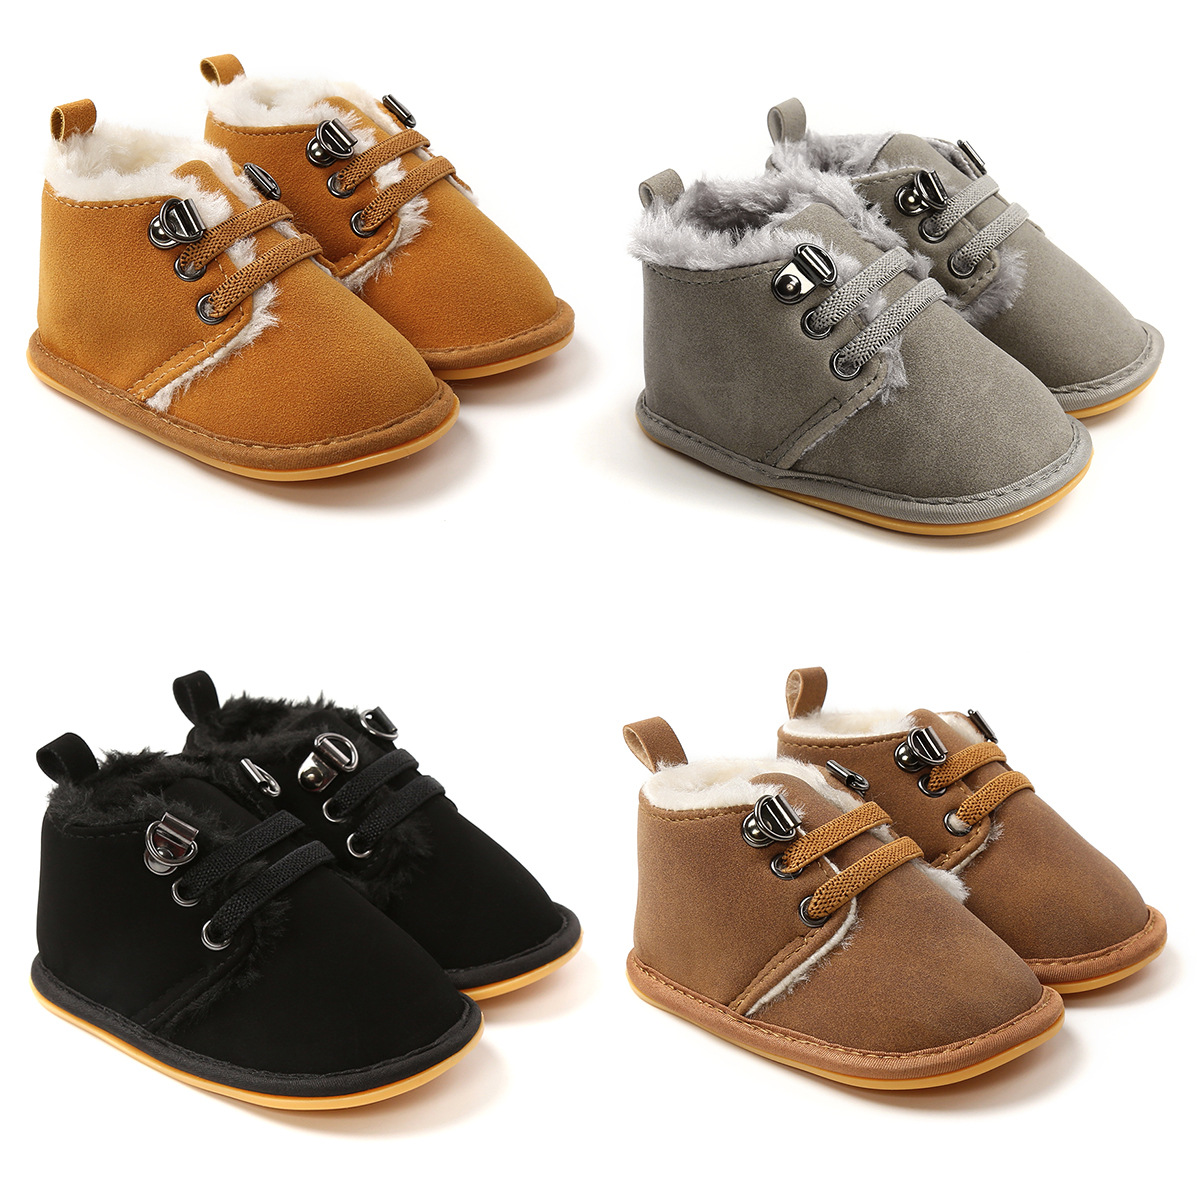 New winter small wool boots baby shoes w...